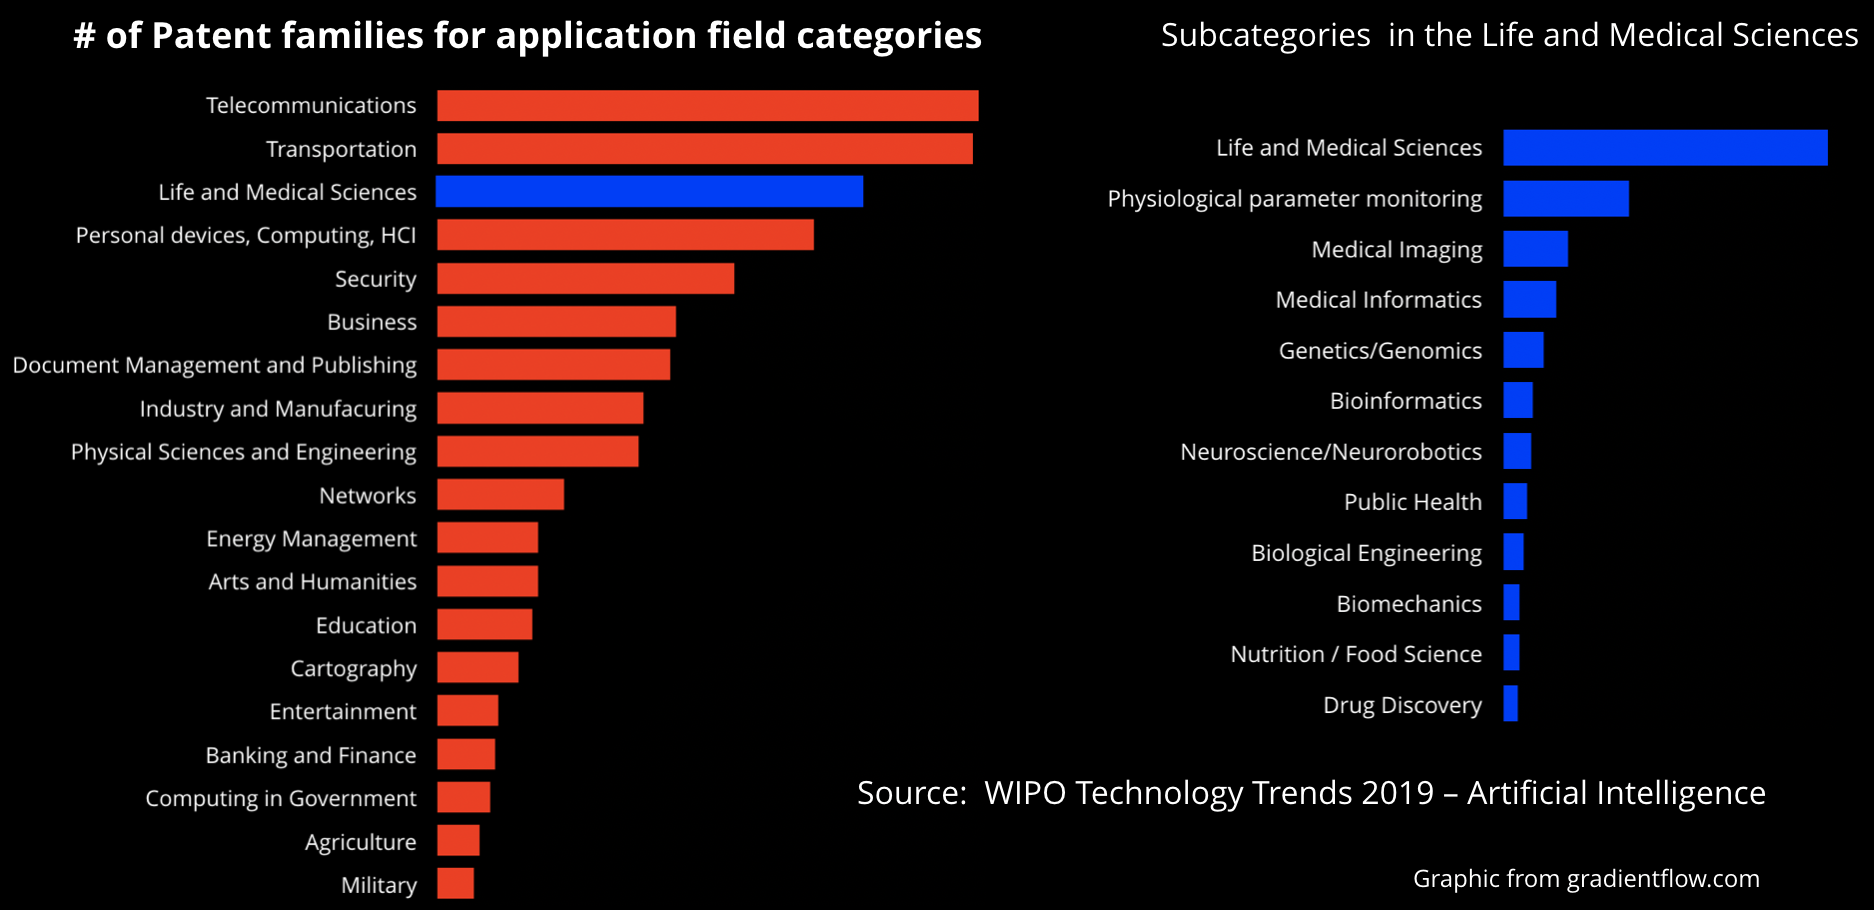 Number of patent families for application field categories